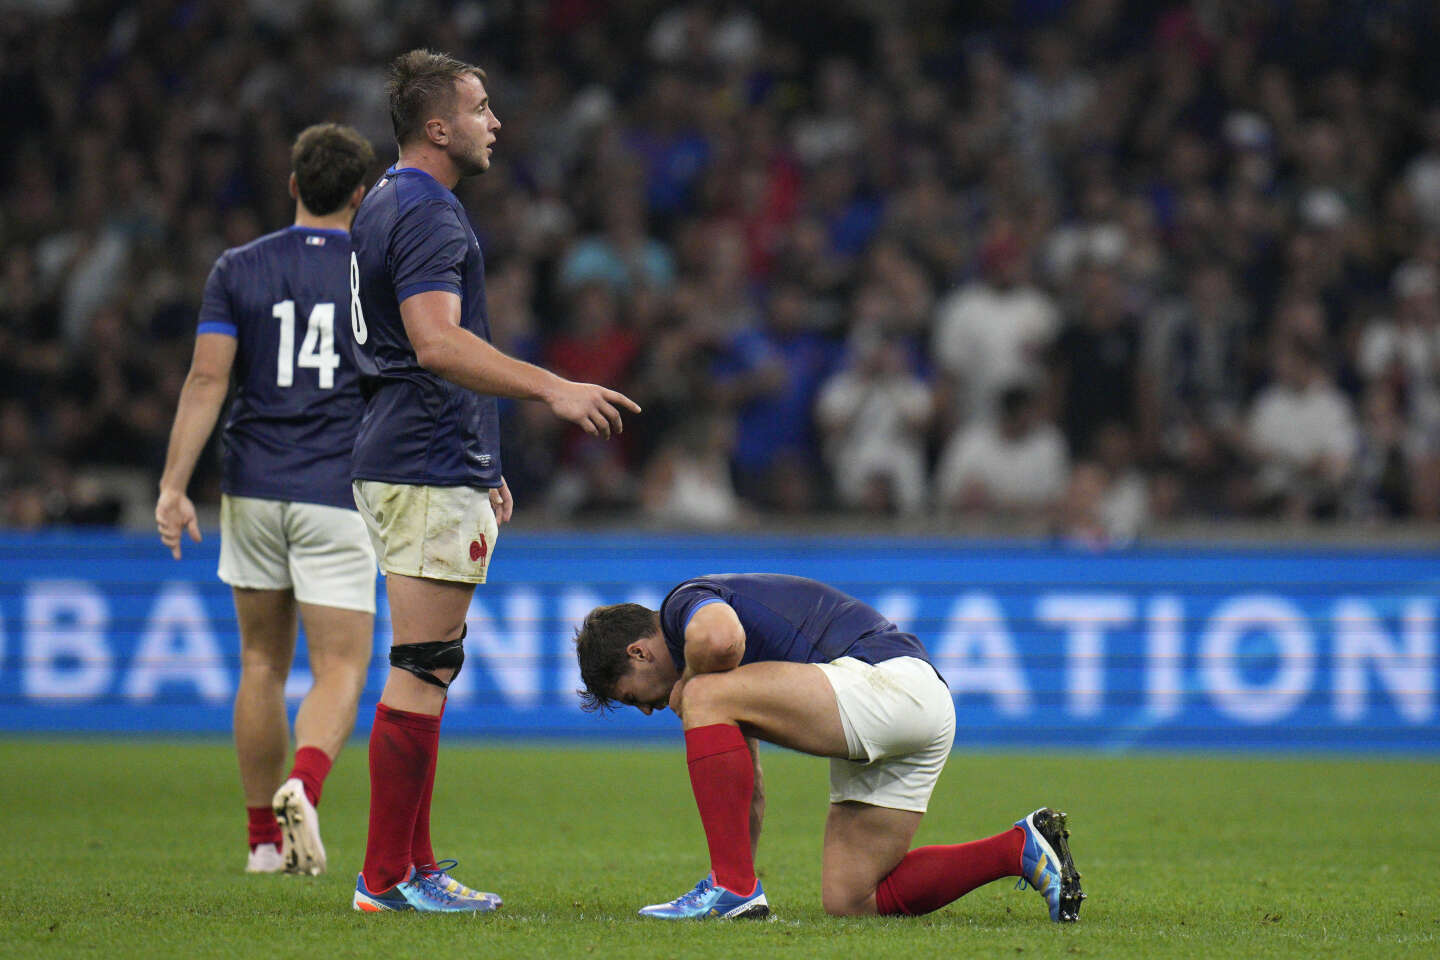 French rugby team captain Dupont has surgery on fractured cheekbone